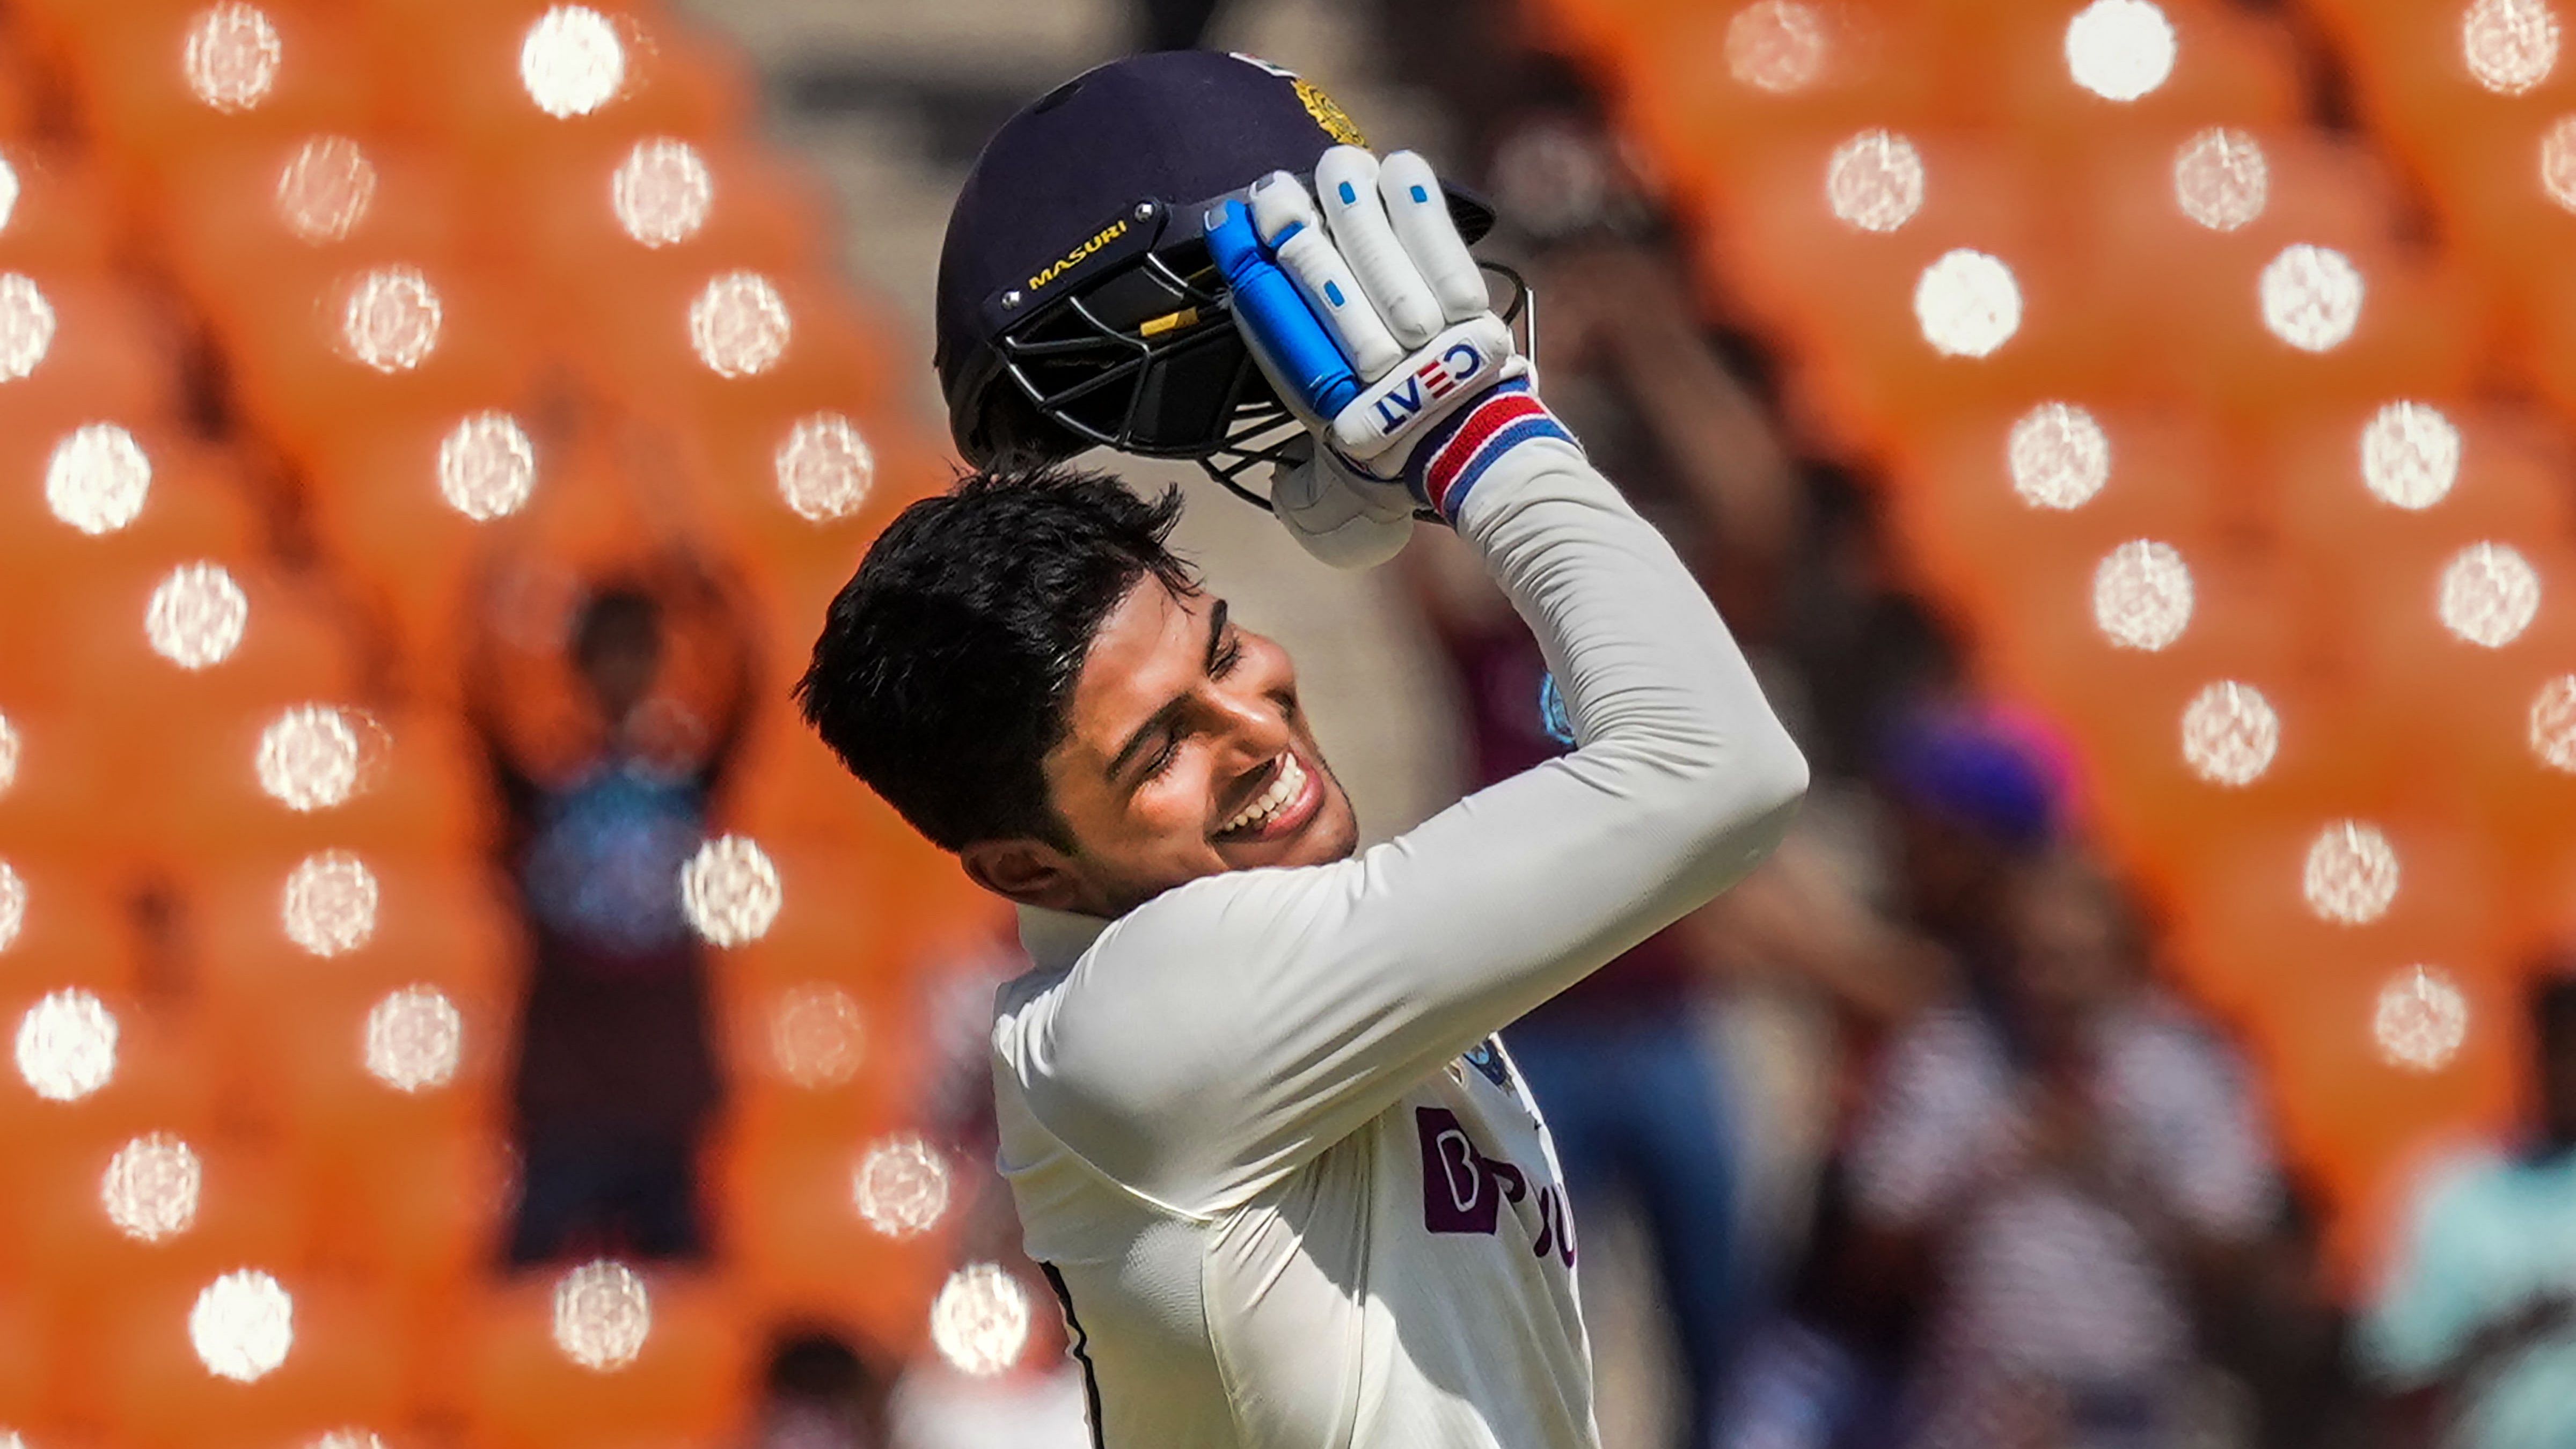 Shubman Gill, all of 23, produced his first Test ton in India, and the second of his career following the one in Bangladesh late last year, in only the third innings after he replaced a struggling KL Rahul on popular demand. Credit: PTI Photo